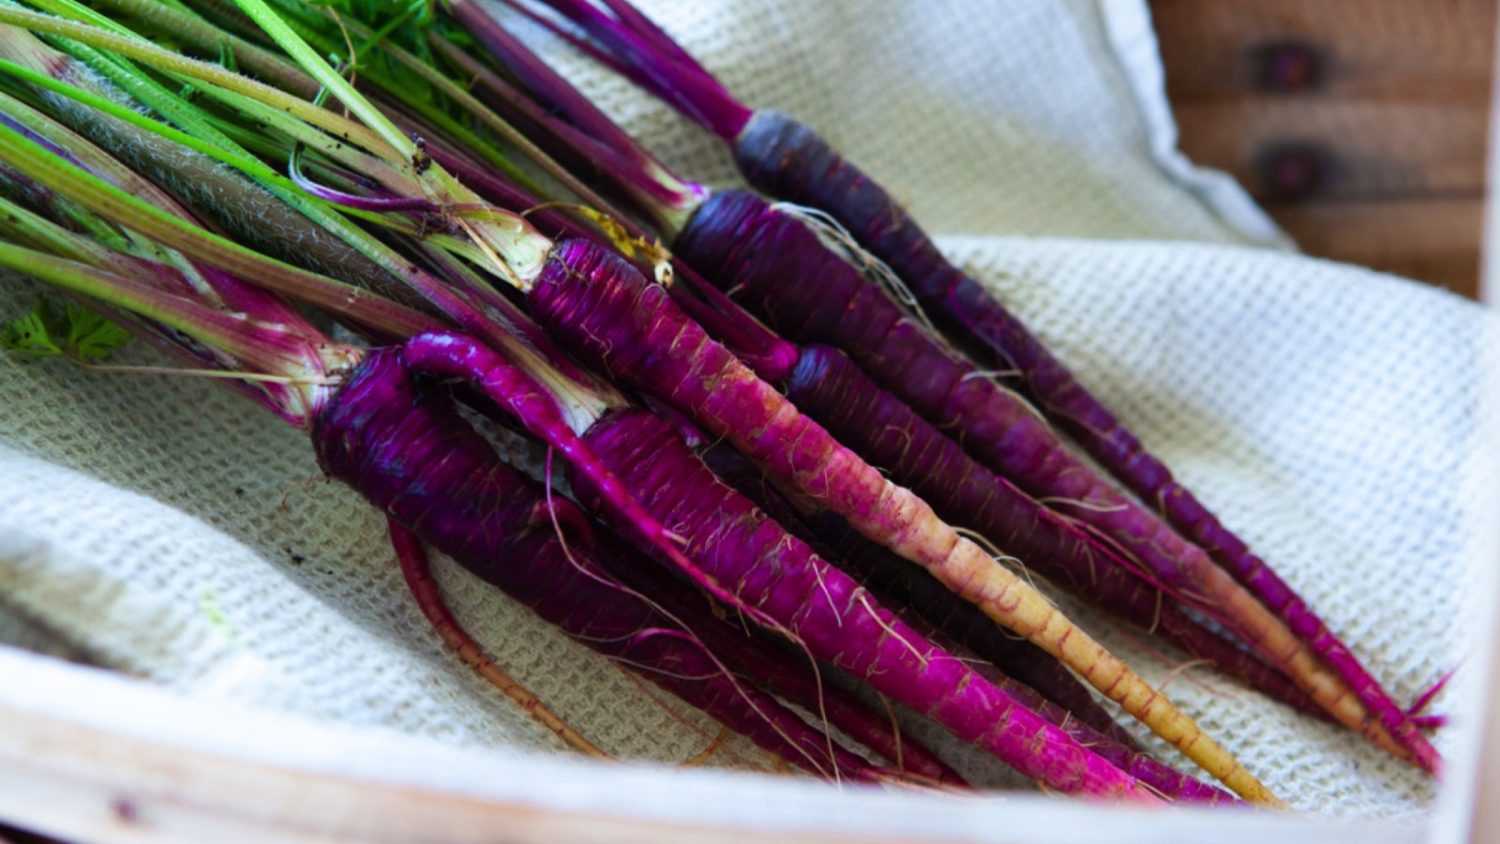 Black Nebula carrot. antioxidant rich with a sweet deep purple root. originating from India. Superfood plant in a trug on the kitchen work top